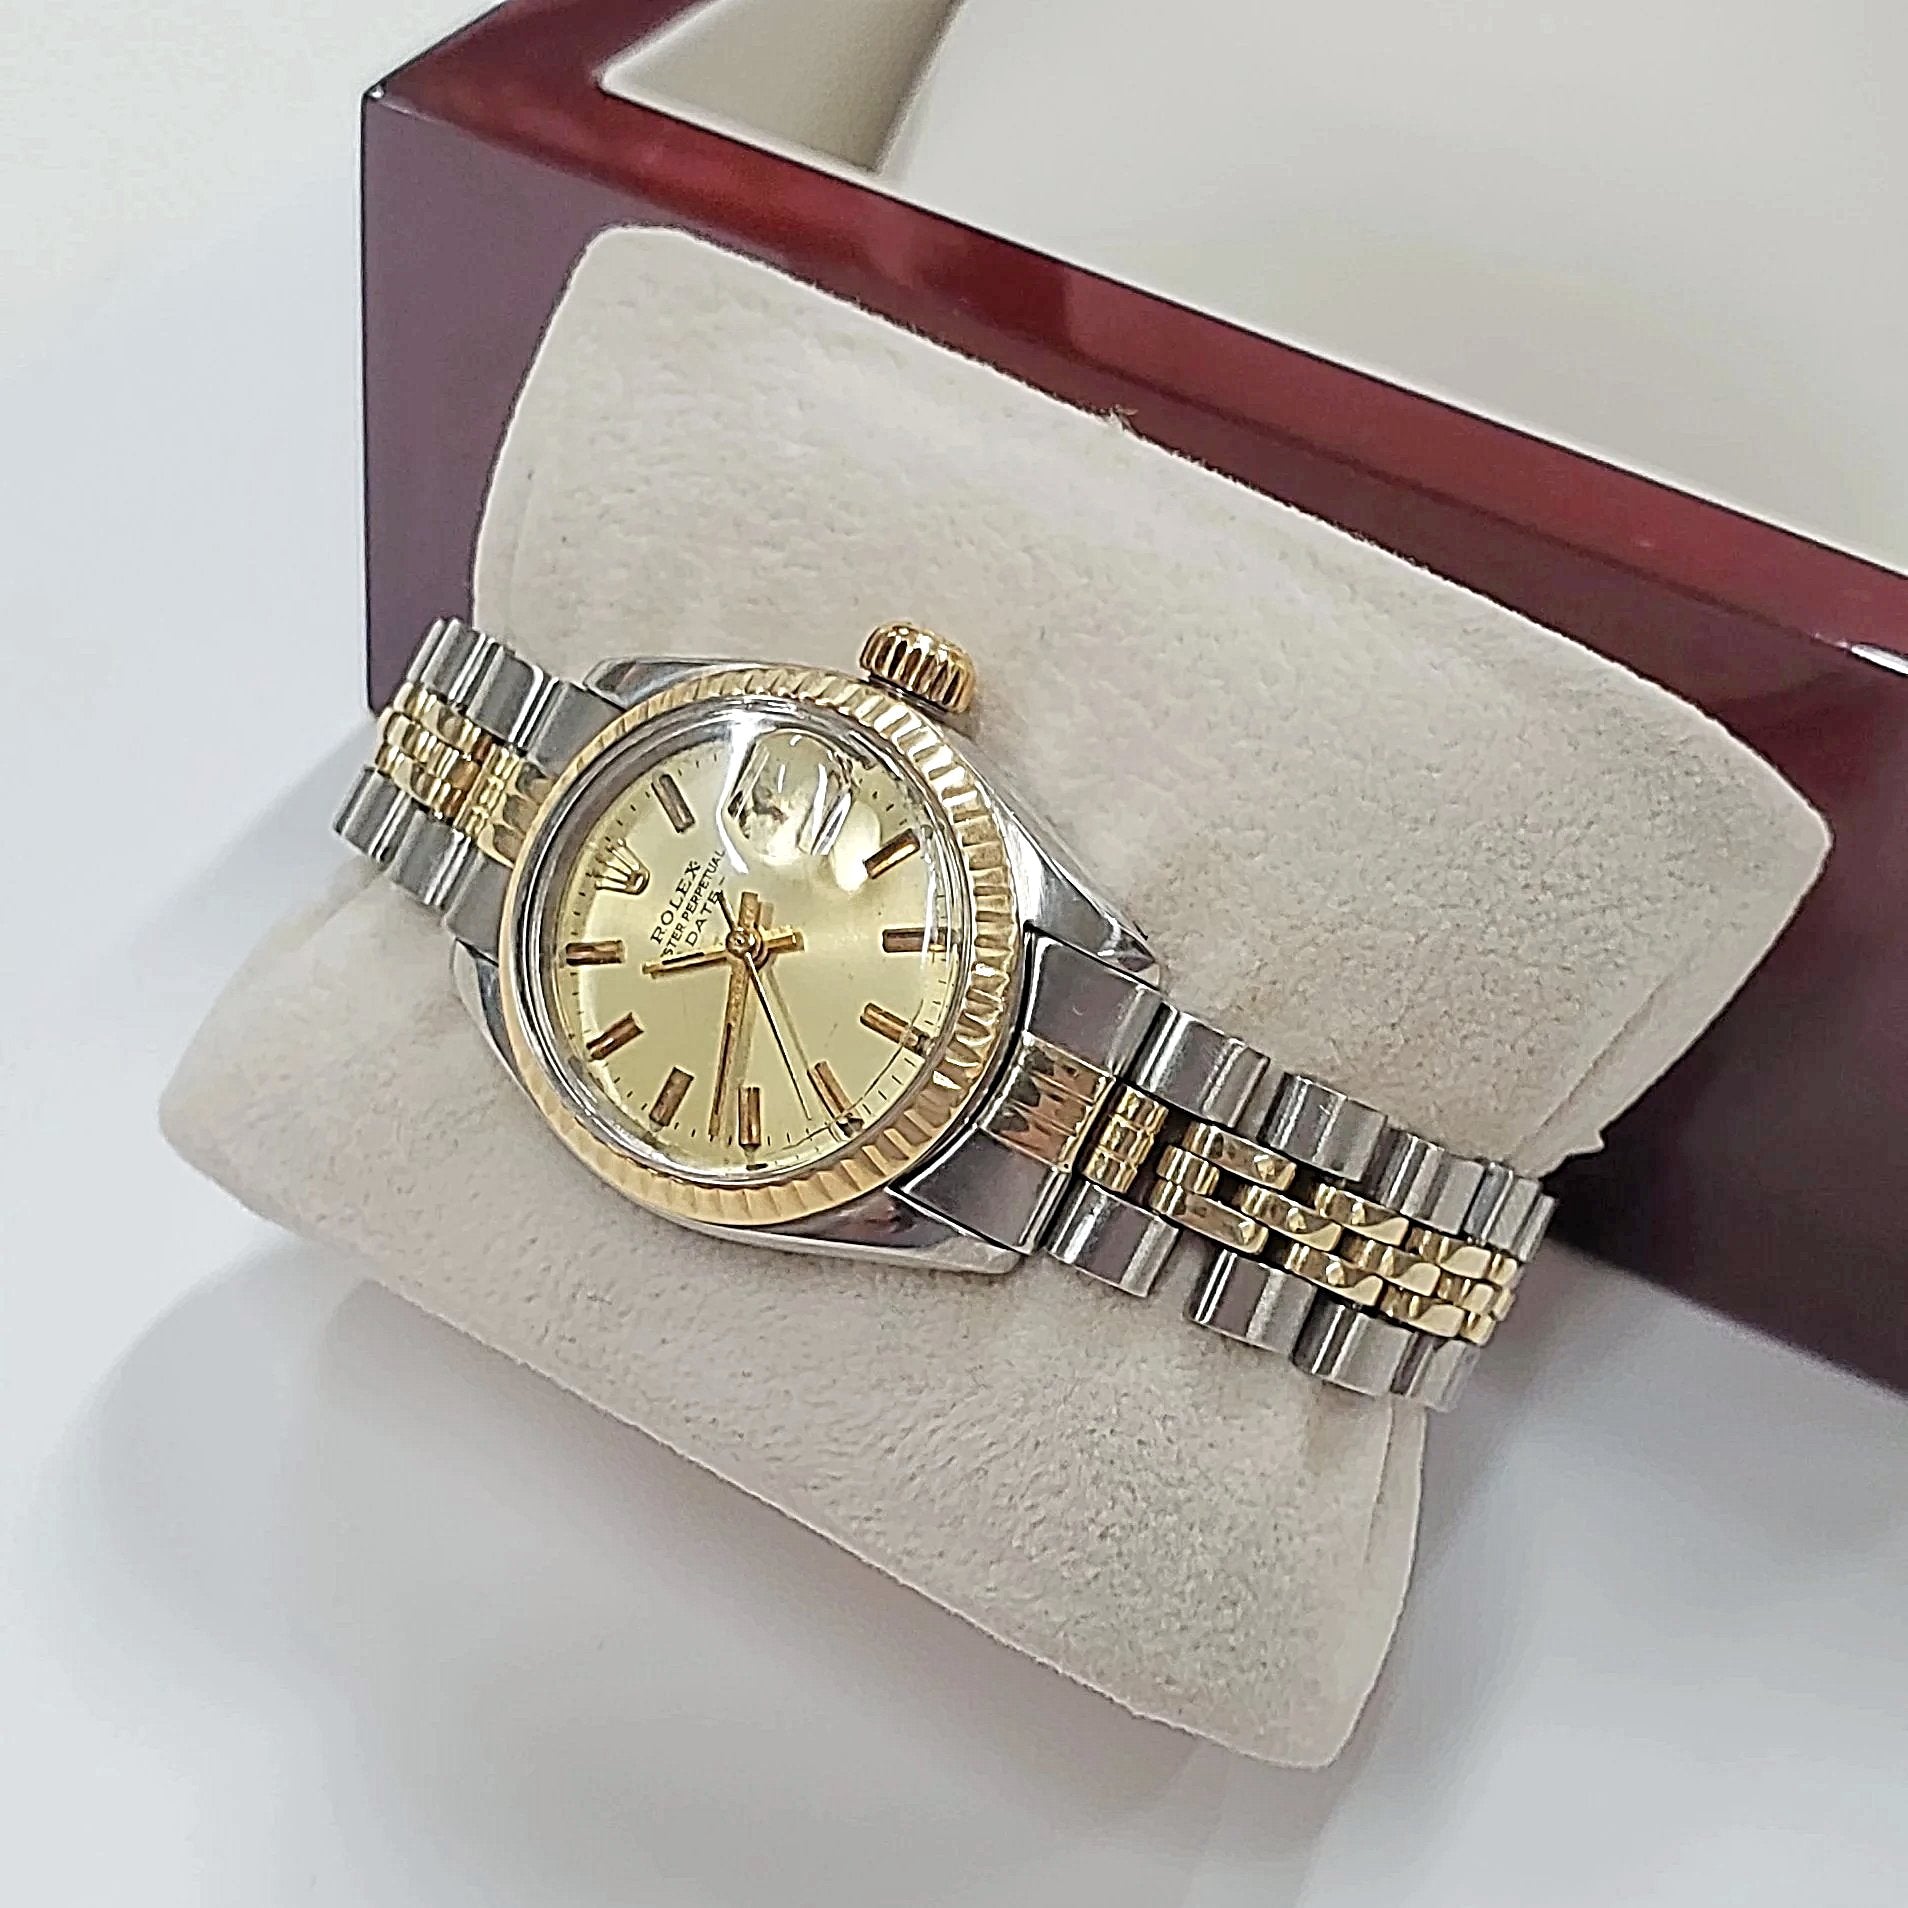 Ladies Rolex 26mm DateJust Two Tone 14K Gold Watch with Champagne Dial and Fluted Bezel. (Pre-Owned)